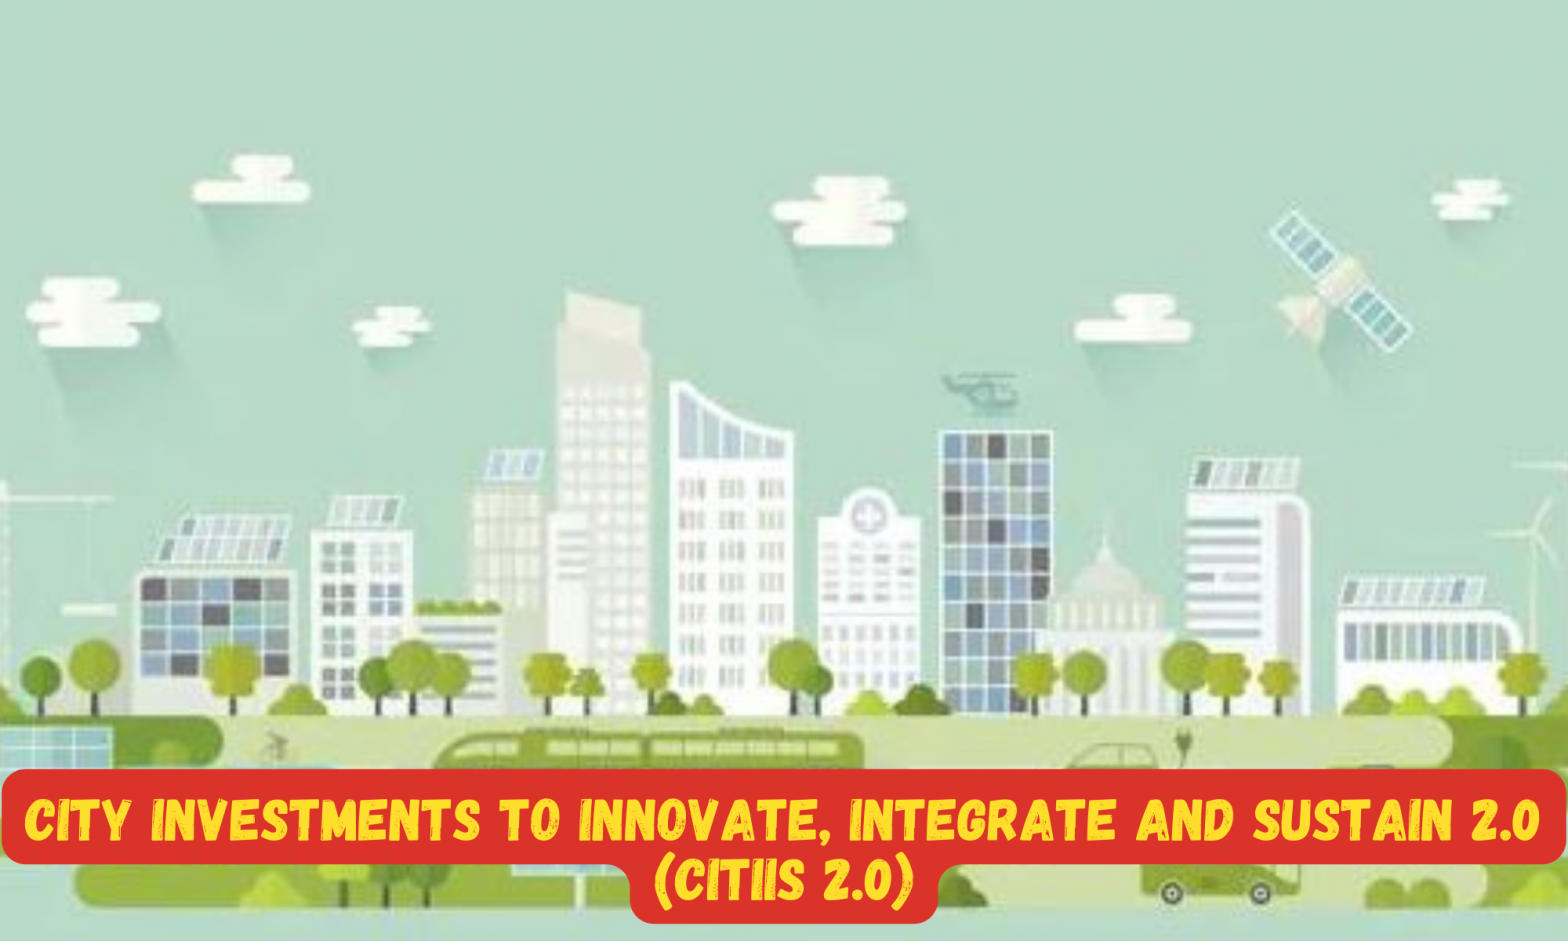 City Investments to Innovate, Integrate and Sustain 2.0 (CITIIS 2.0)